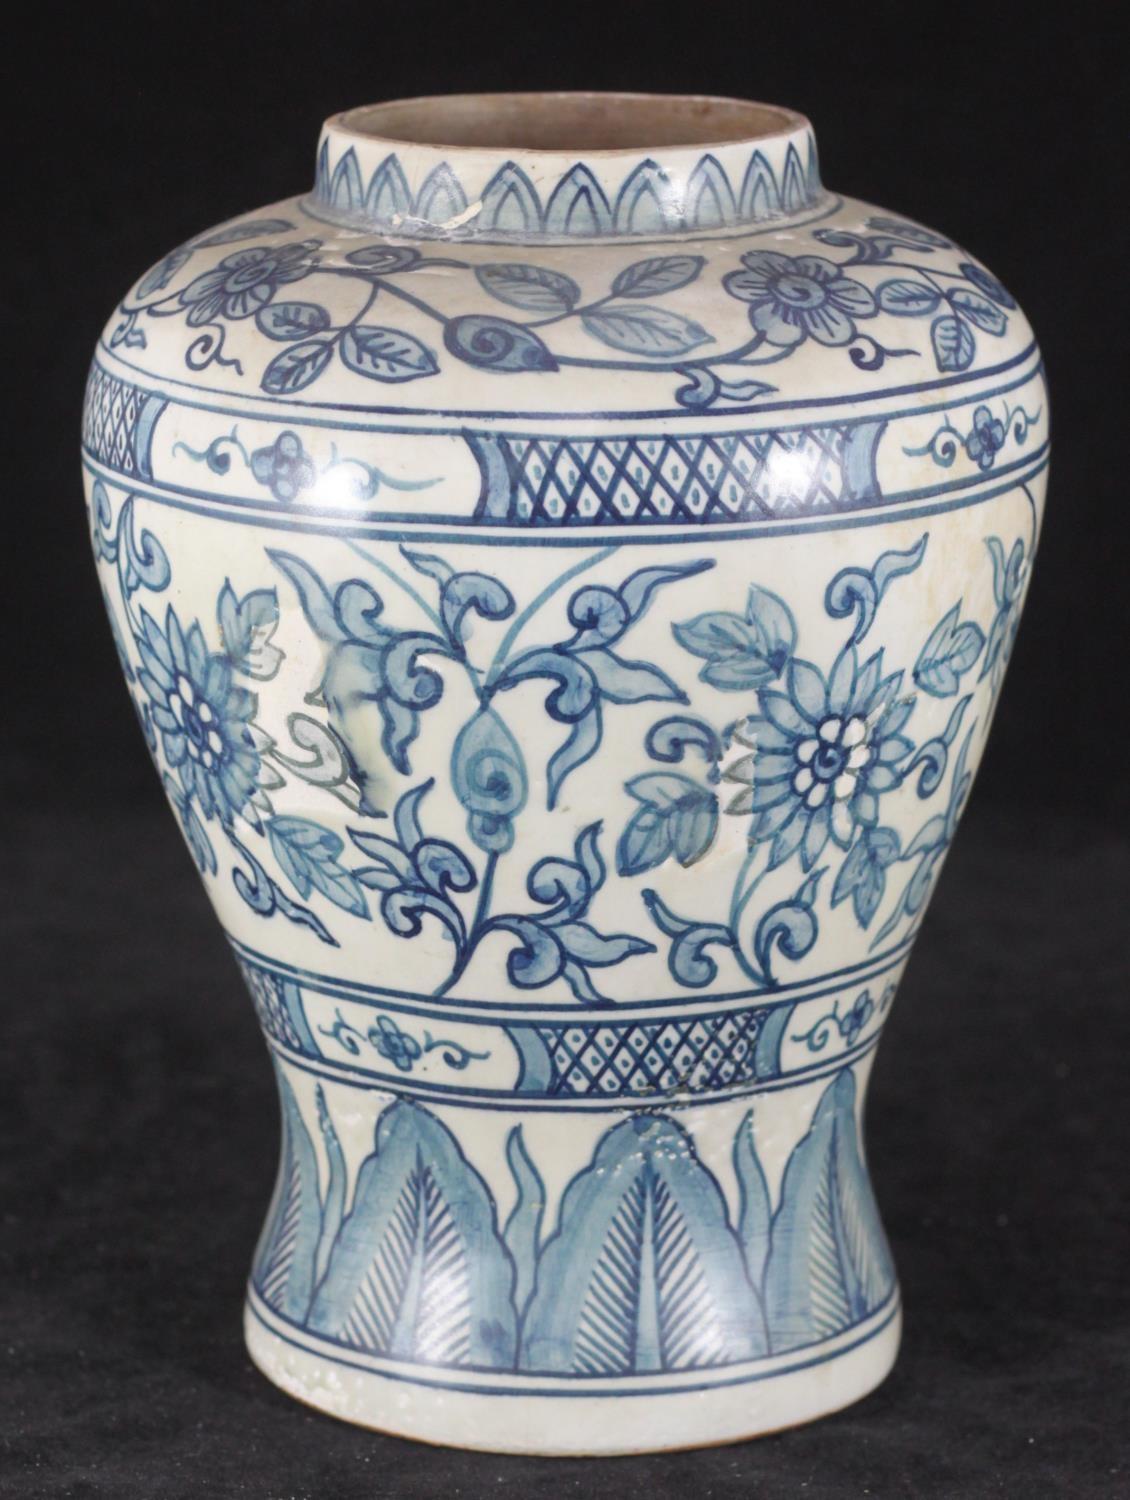 A Chinese pottery vase of inverted baluster form, decorated in a blue and white floral design.